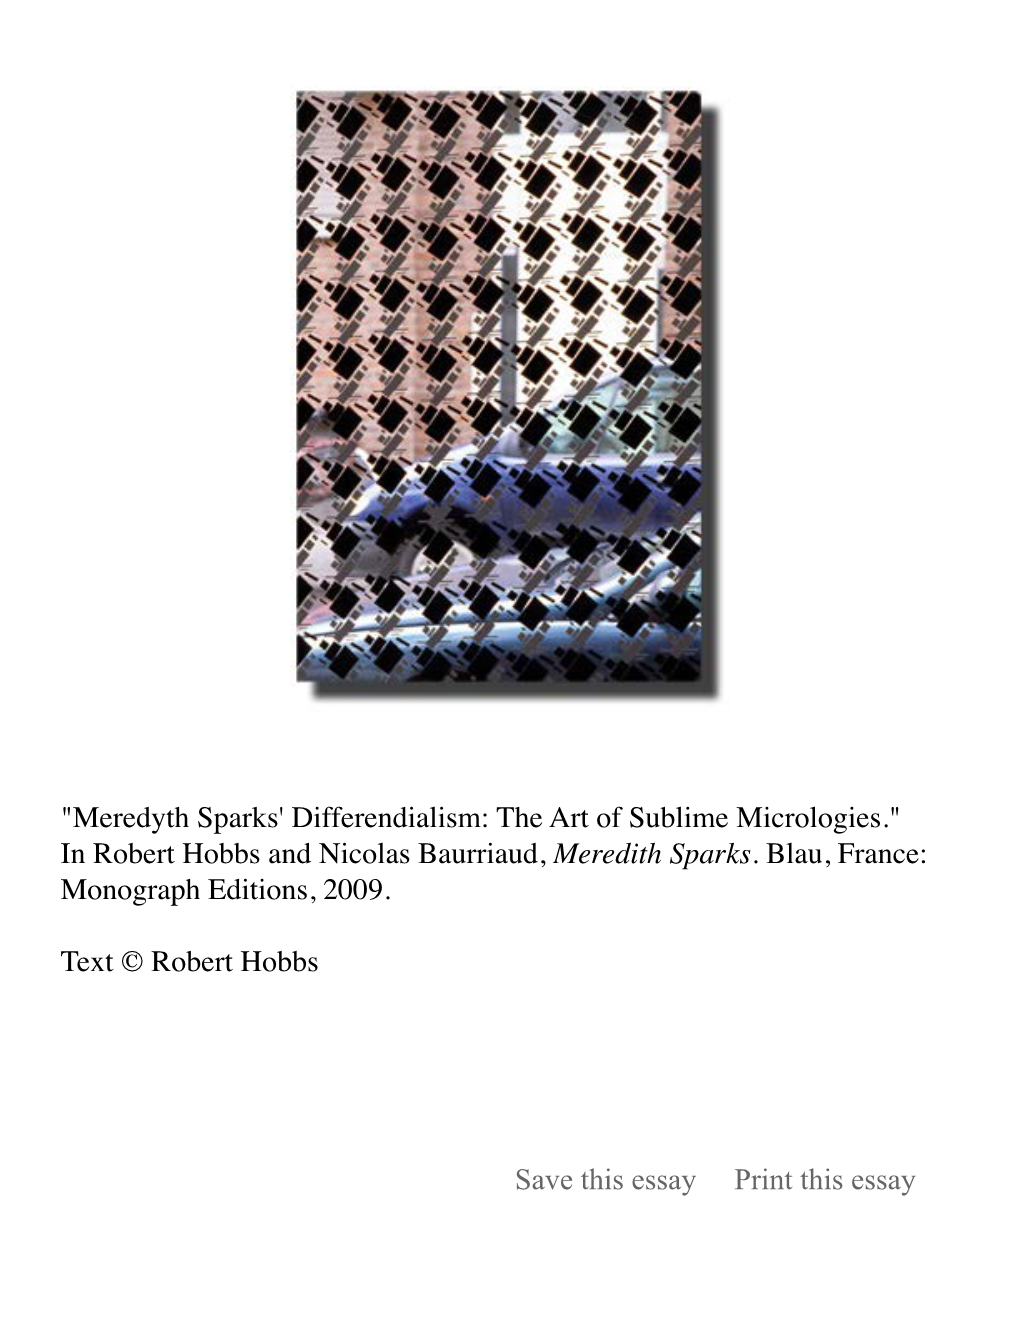 Meredyth Spark's Differendialism: the Art of Sublime Micrologies